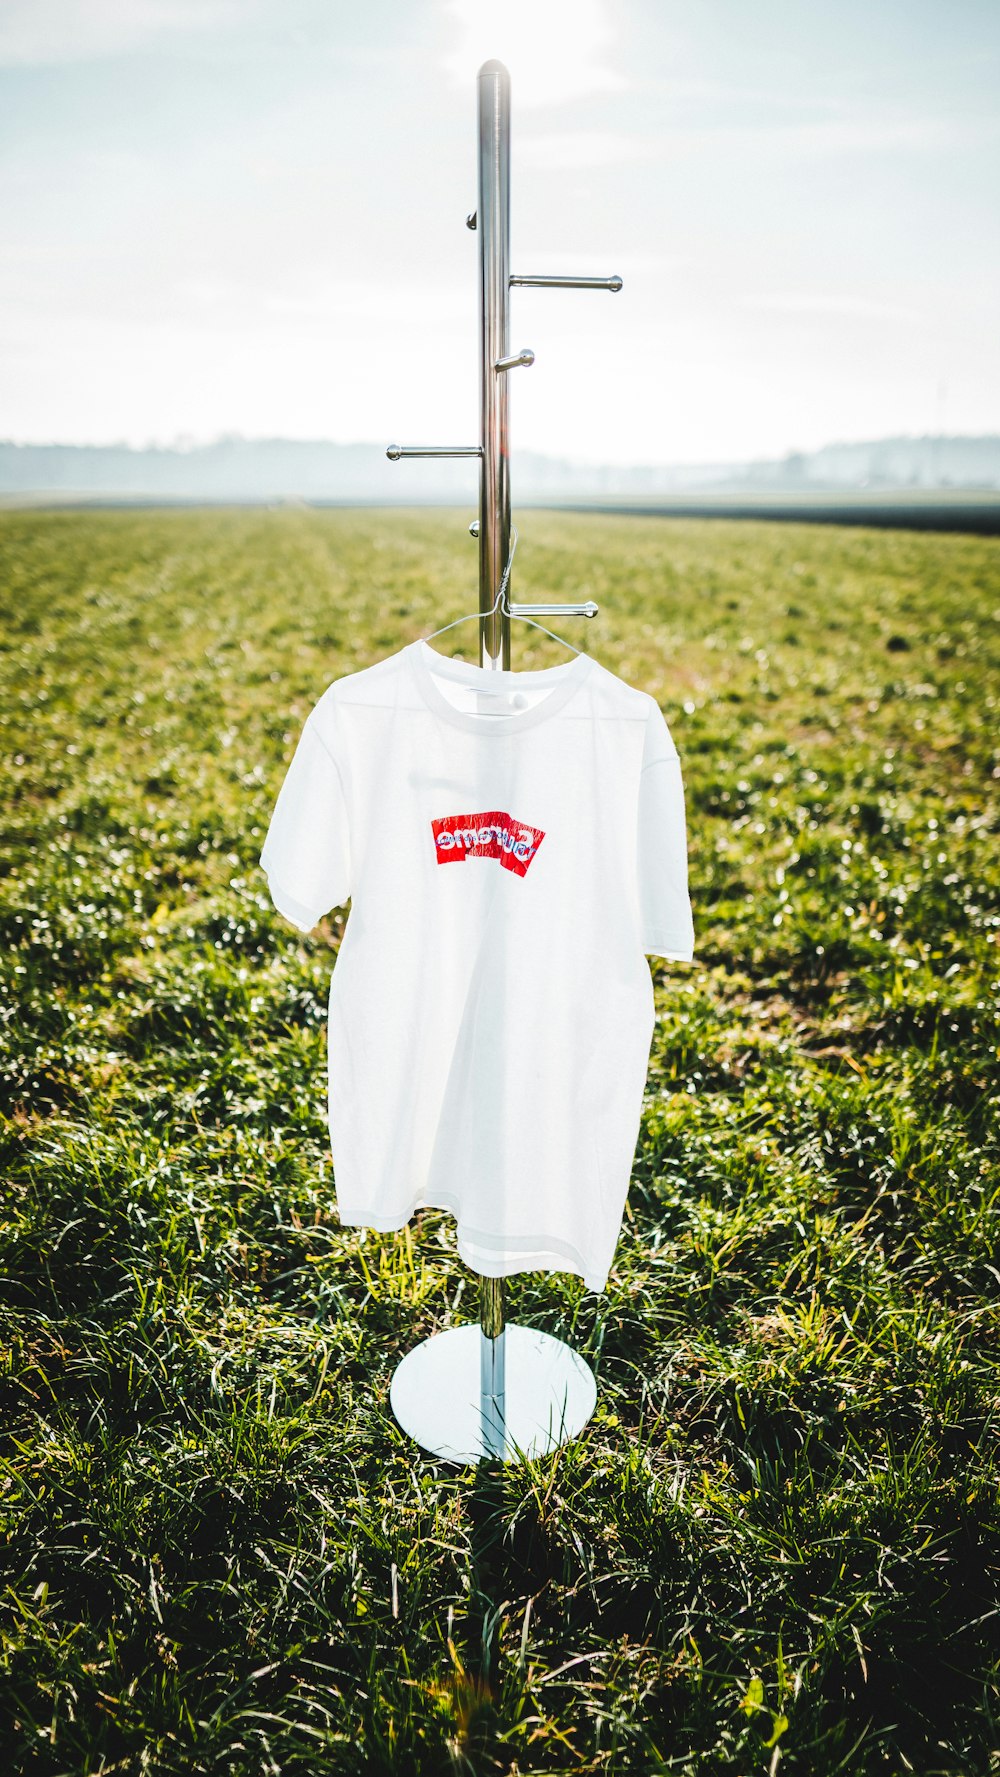 hanged white and red crew-neck shirt on display rack on green grass